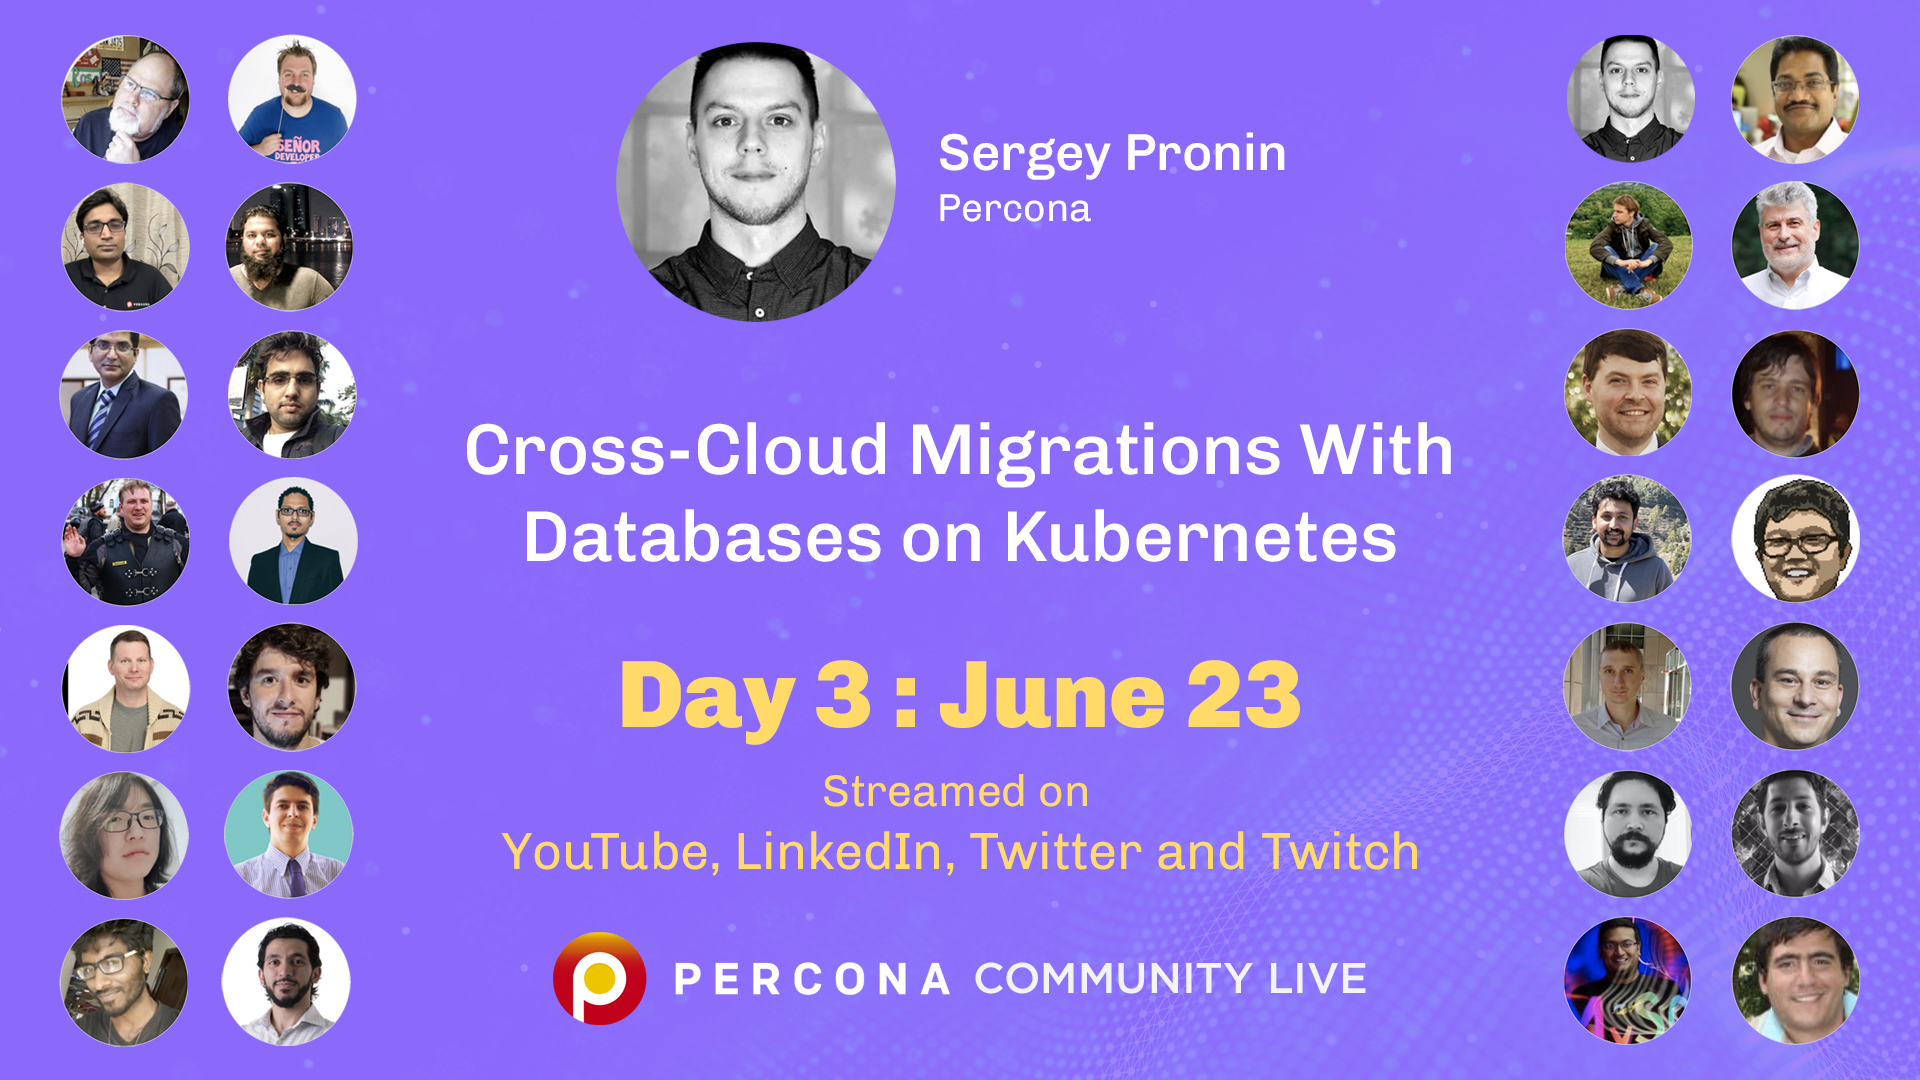 Cross-Cloud Migrations With Databases on Kubernetes